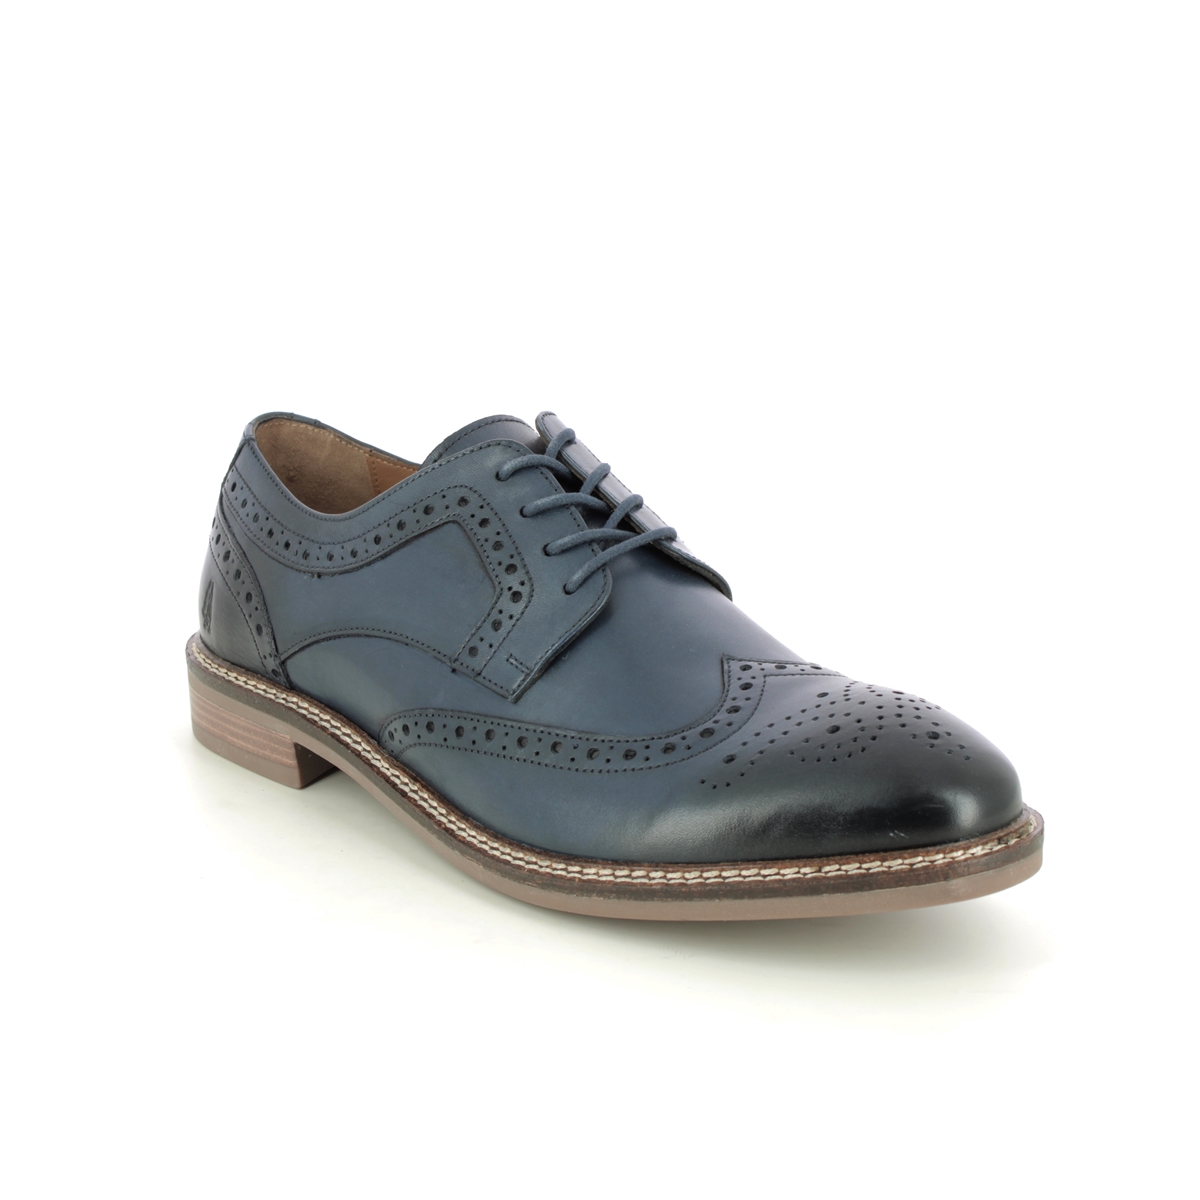 Hush Puppies Bryson Navy leather Mens Brogues 31280-53486 in a Plain Leather in Size 10